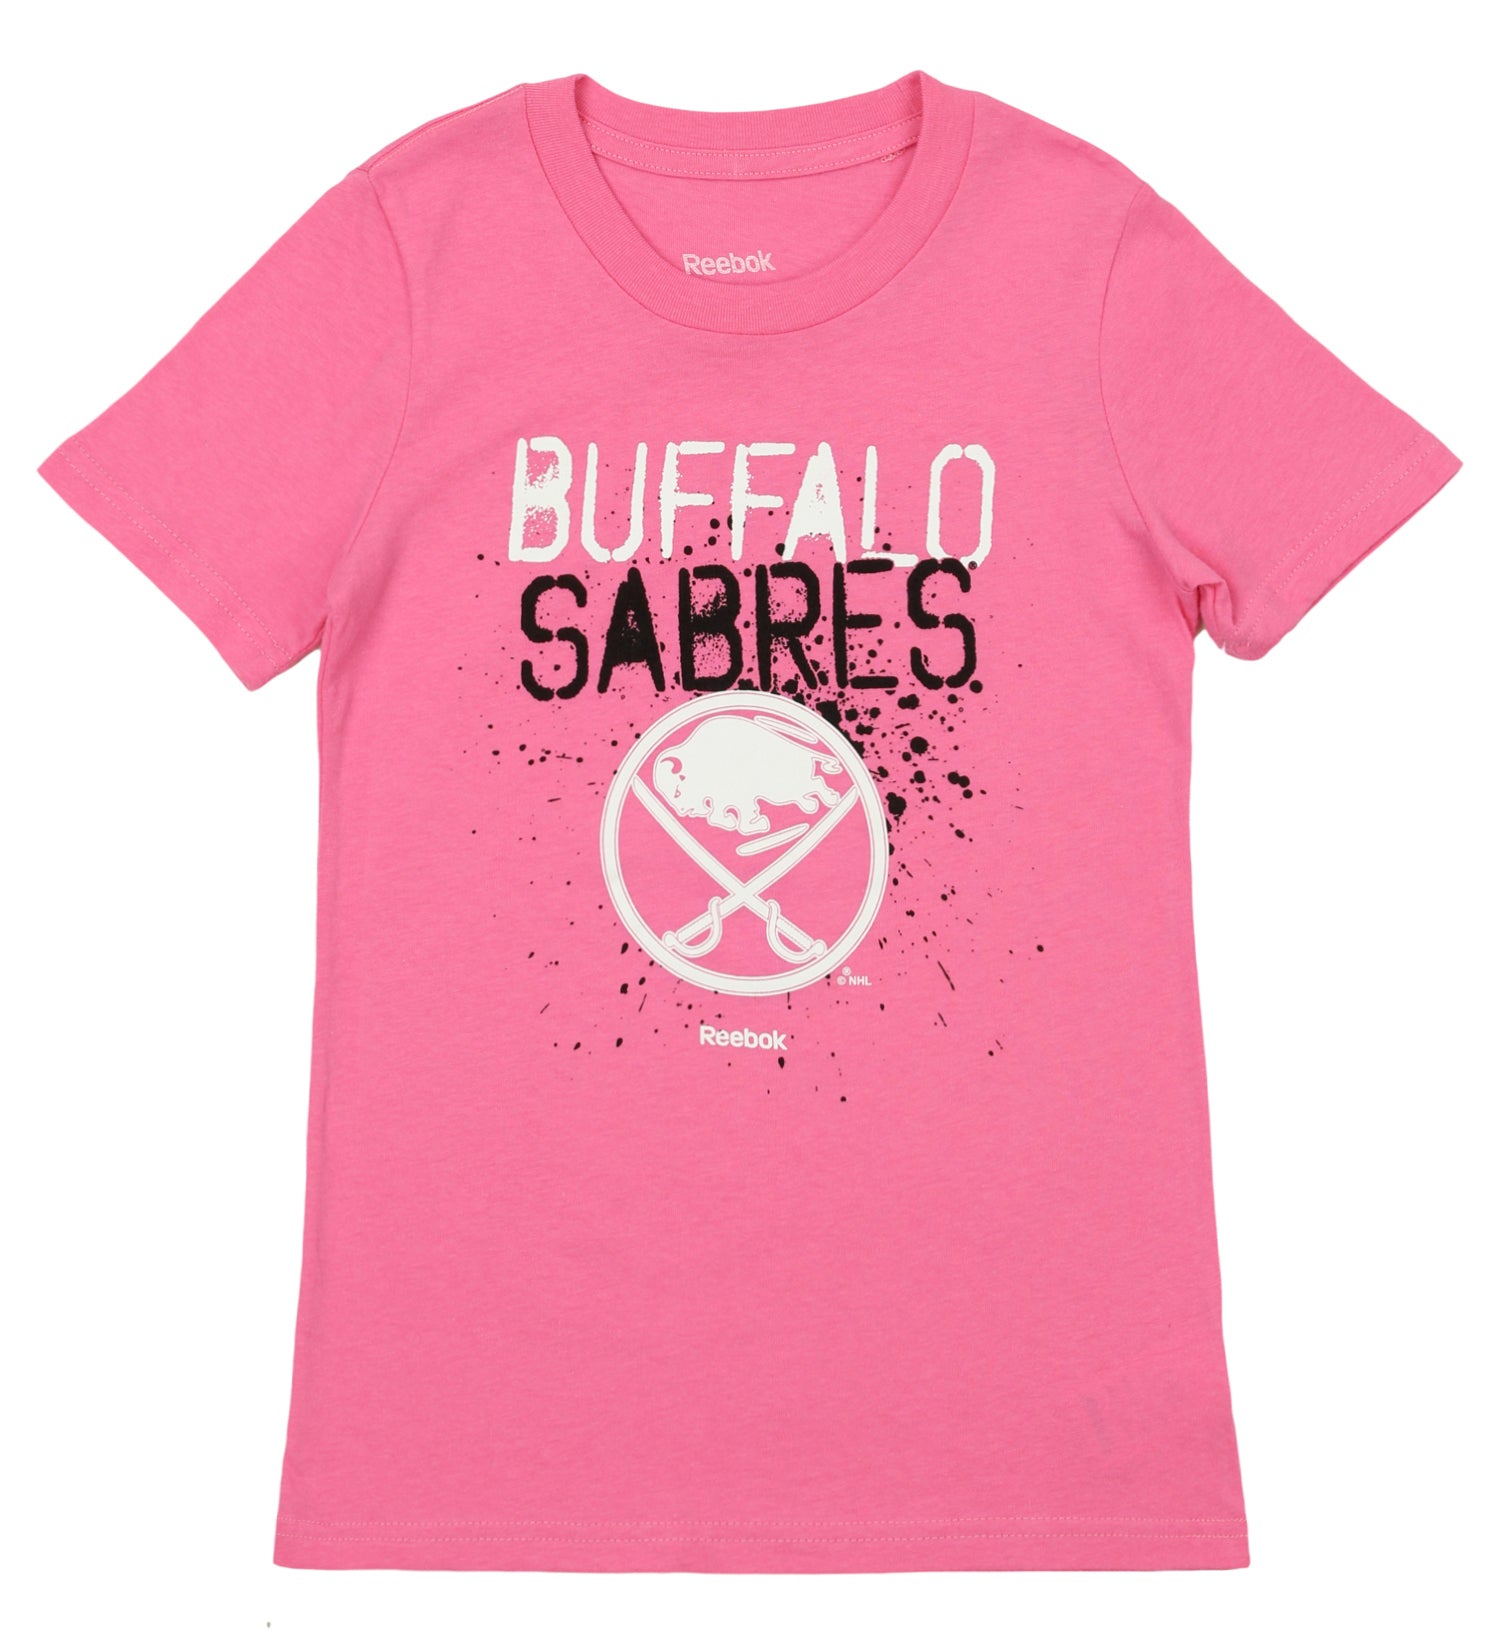  Outerstuff NHL Buffalo Sabres Youth Boys Shirt X-Small